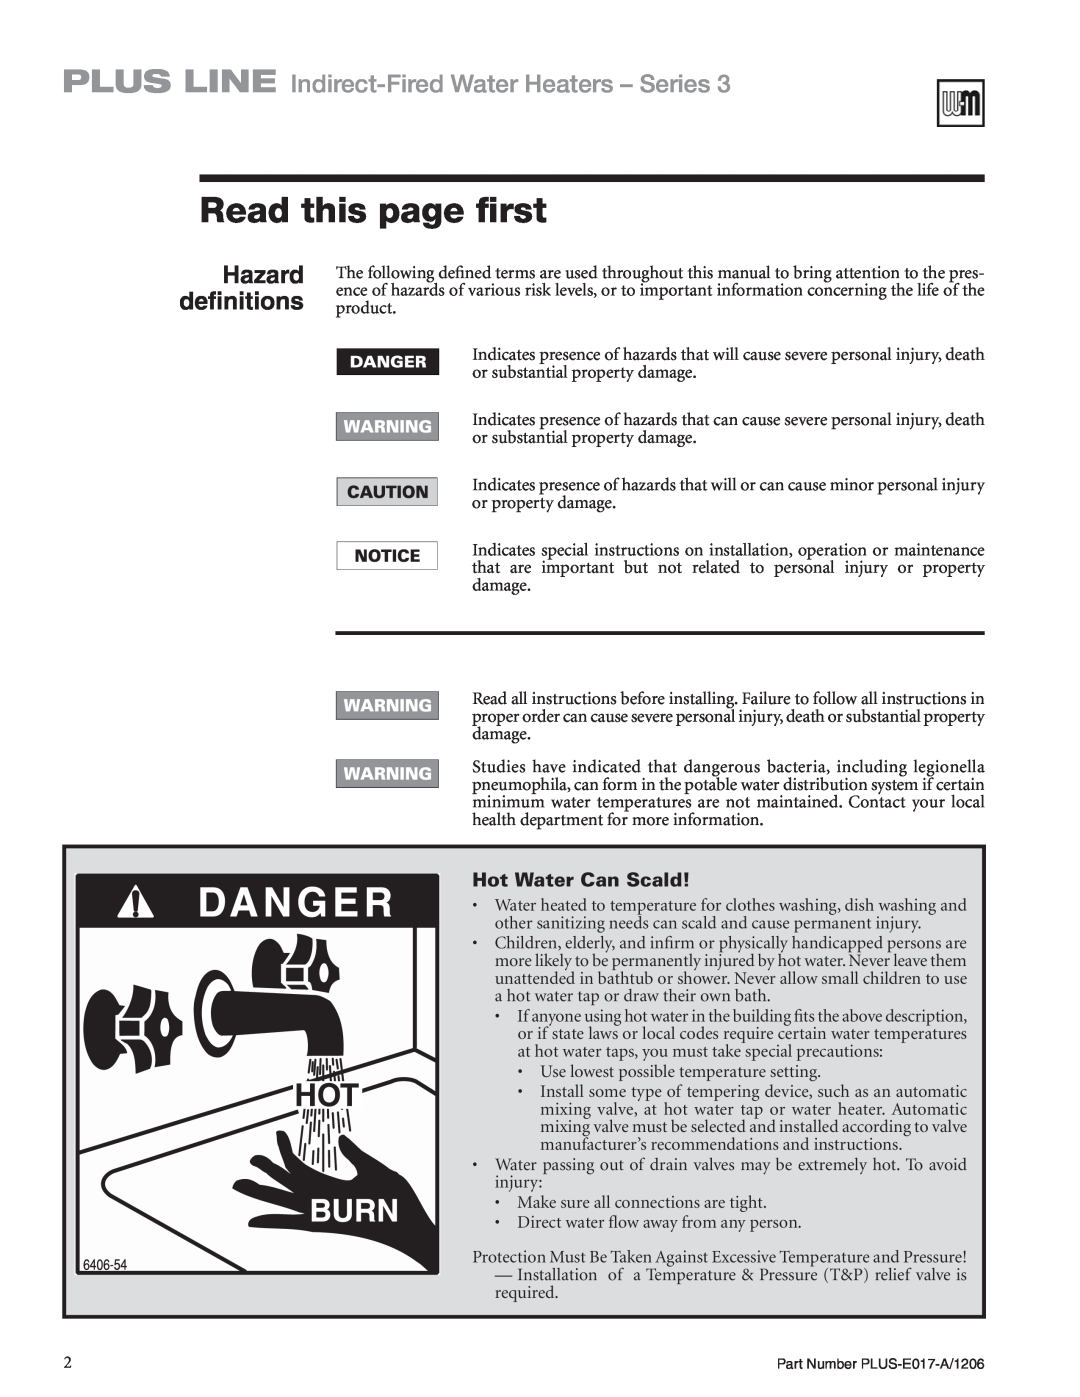 Weil-McLain PLUS-E017-A/1206 Read this page first, PLUS LINE Indirect-FiredWater Heaters - Series, Hazard definitions 